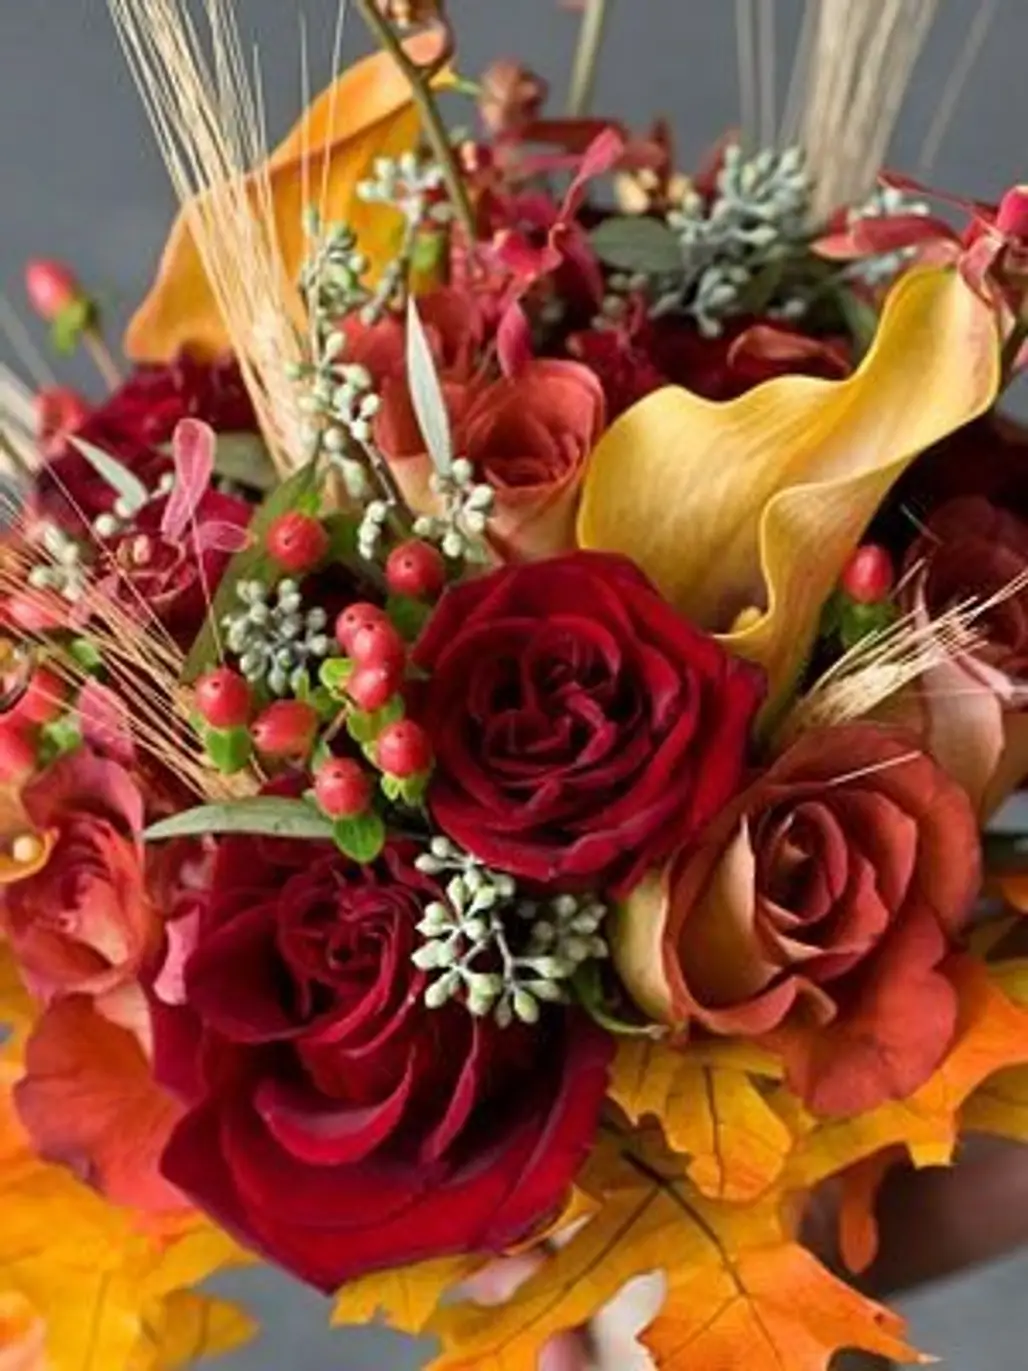 Roses, Calla Lilies, Mokara Orchids, Hypericum Berries, Eucalyptus Rounded out with Fall Leaves